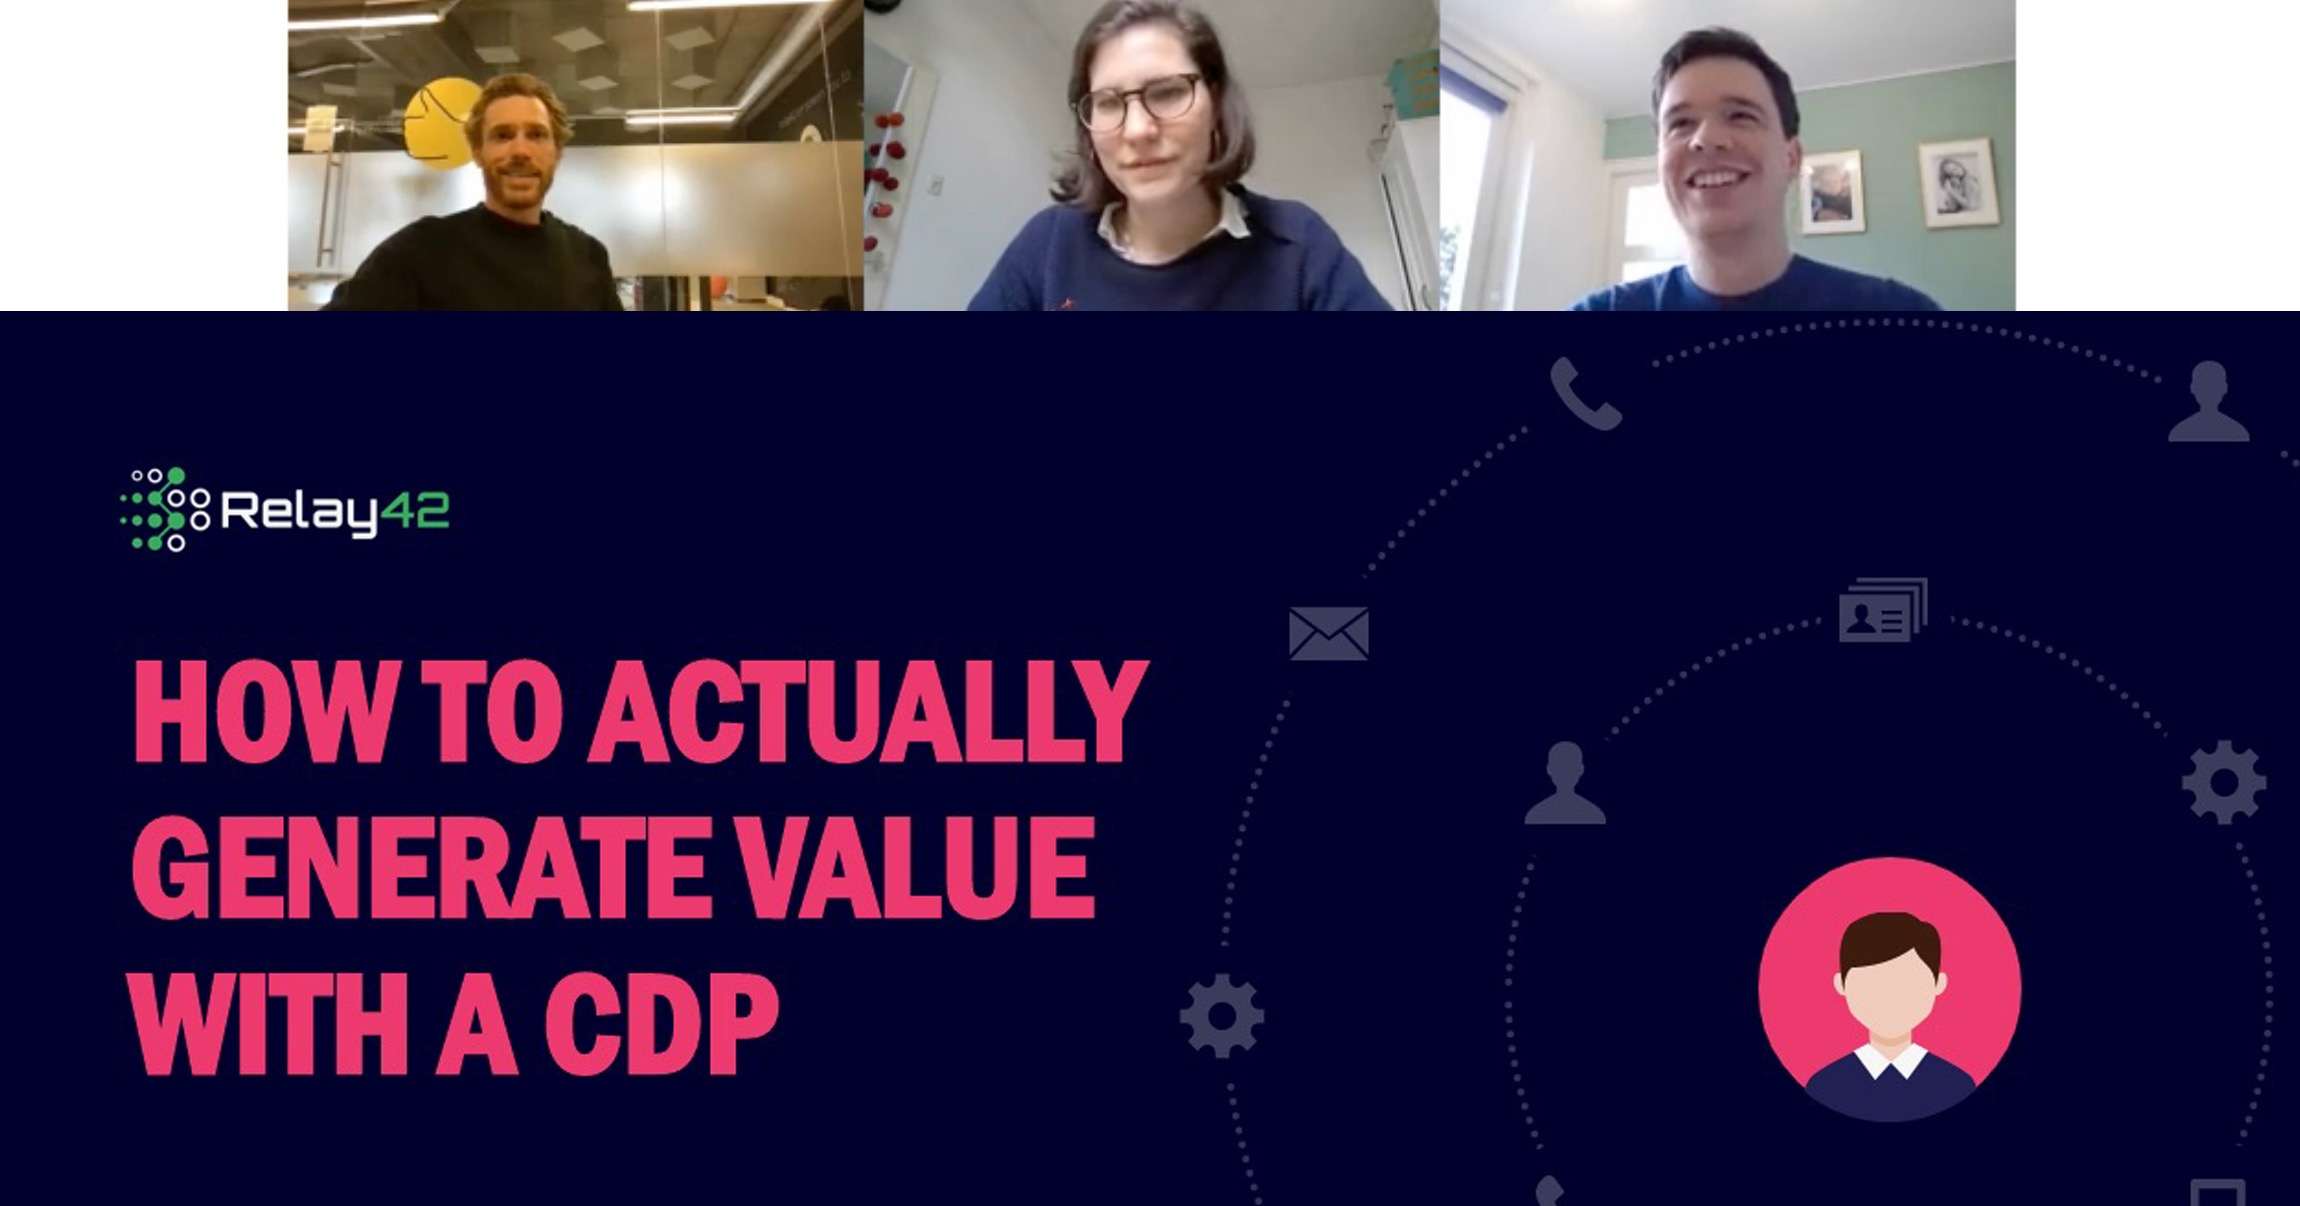 On-Demand Webinar: How to Actually Generate Value with a CDP